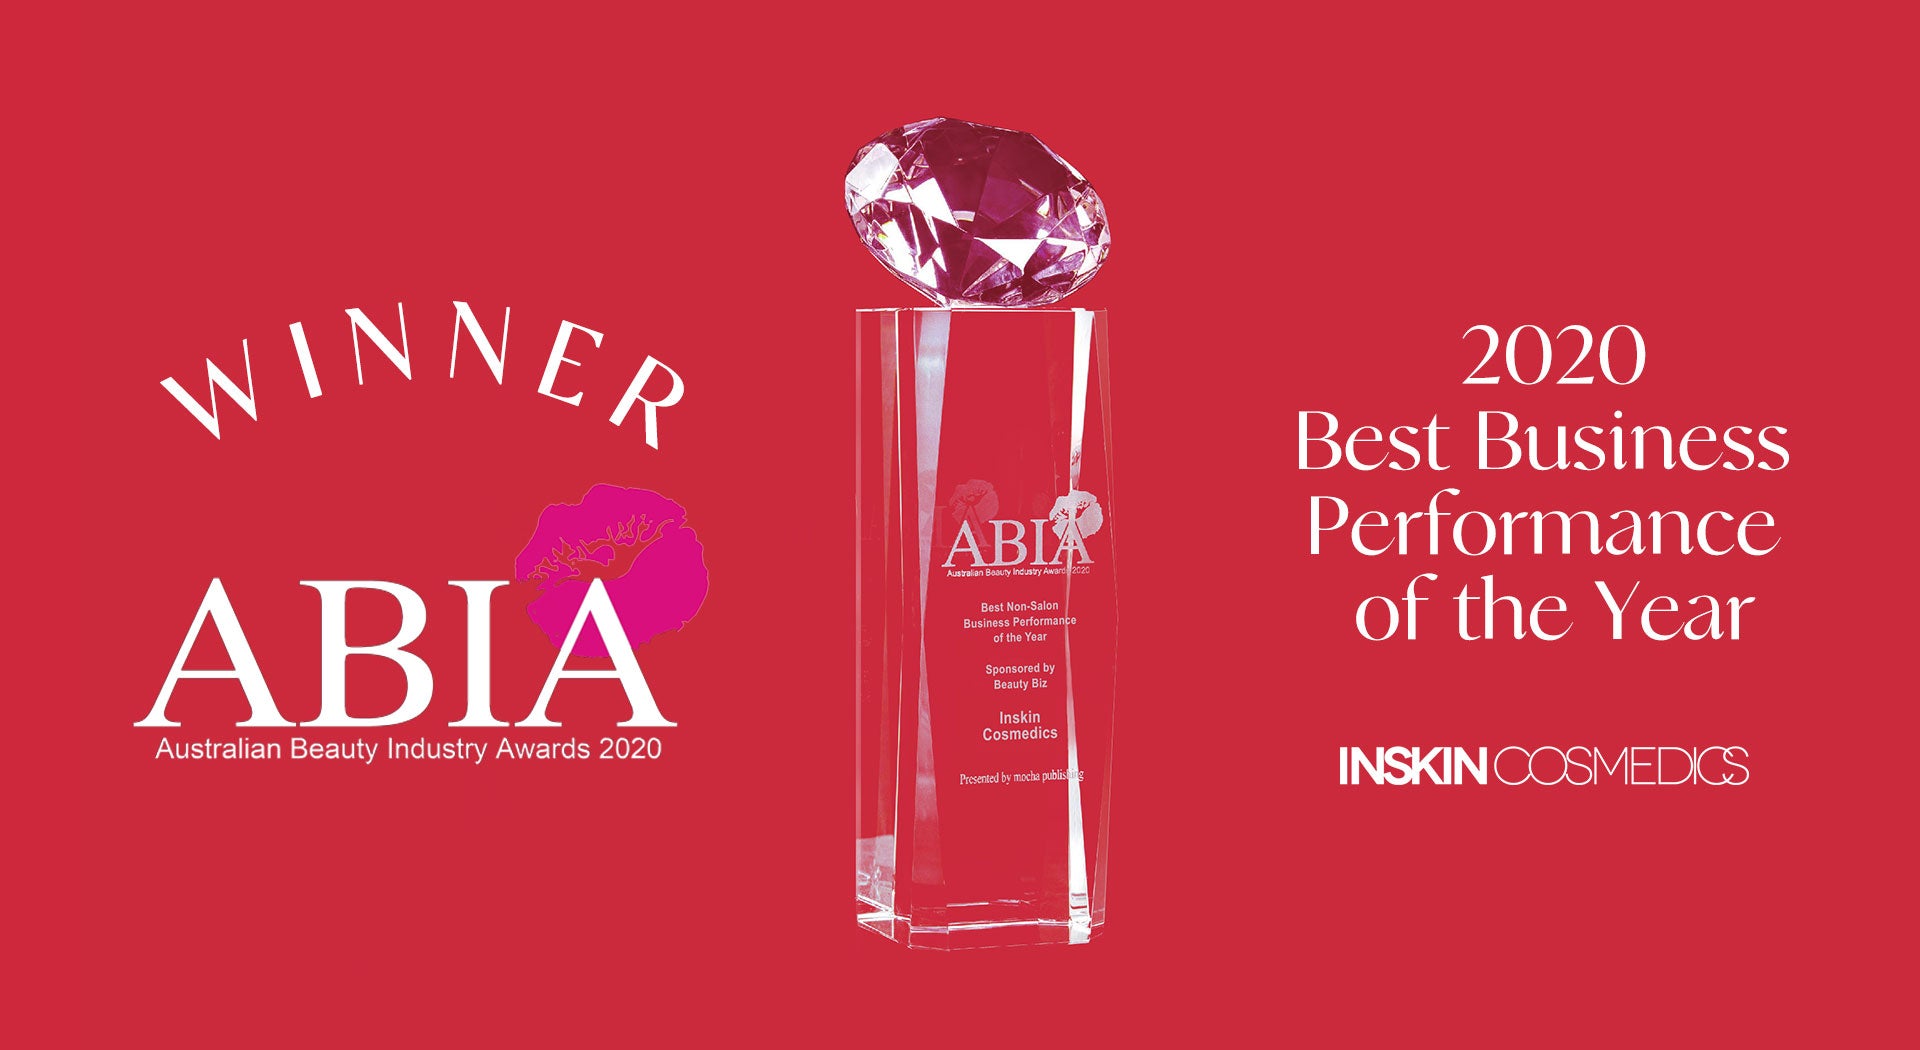 INSKIN COSMEDICS Wins ABIA 2020 Best Business Performance of the Year